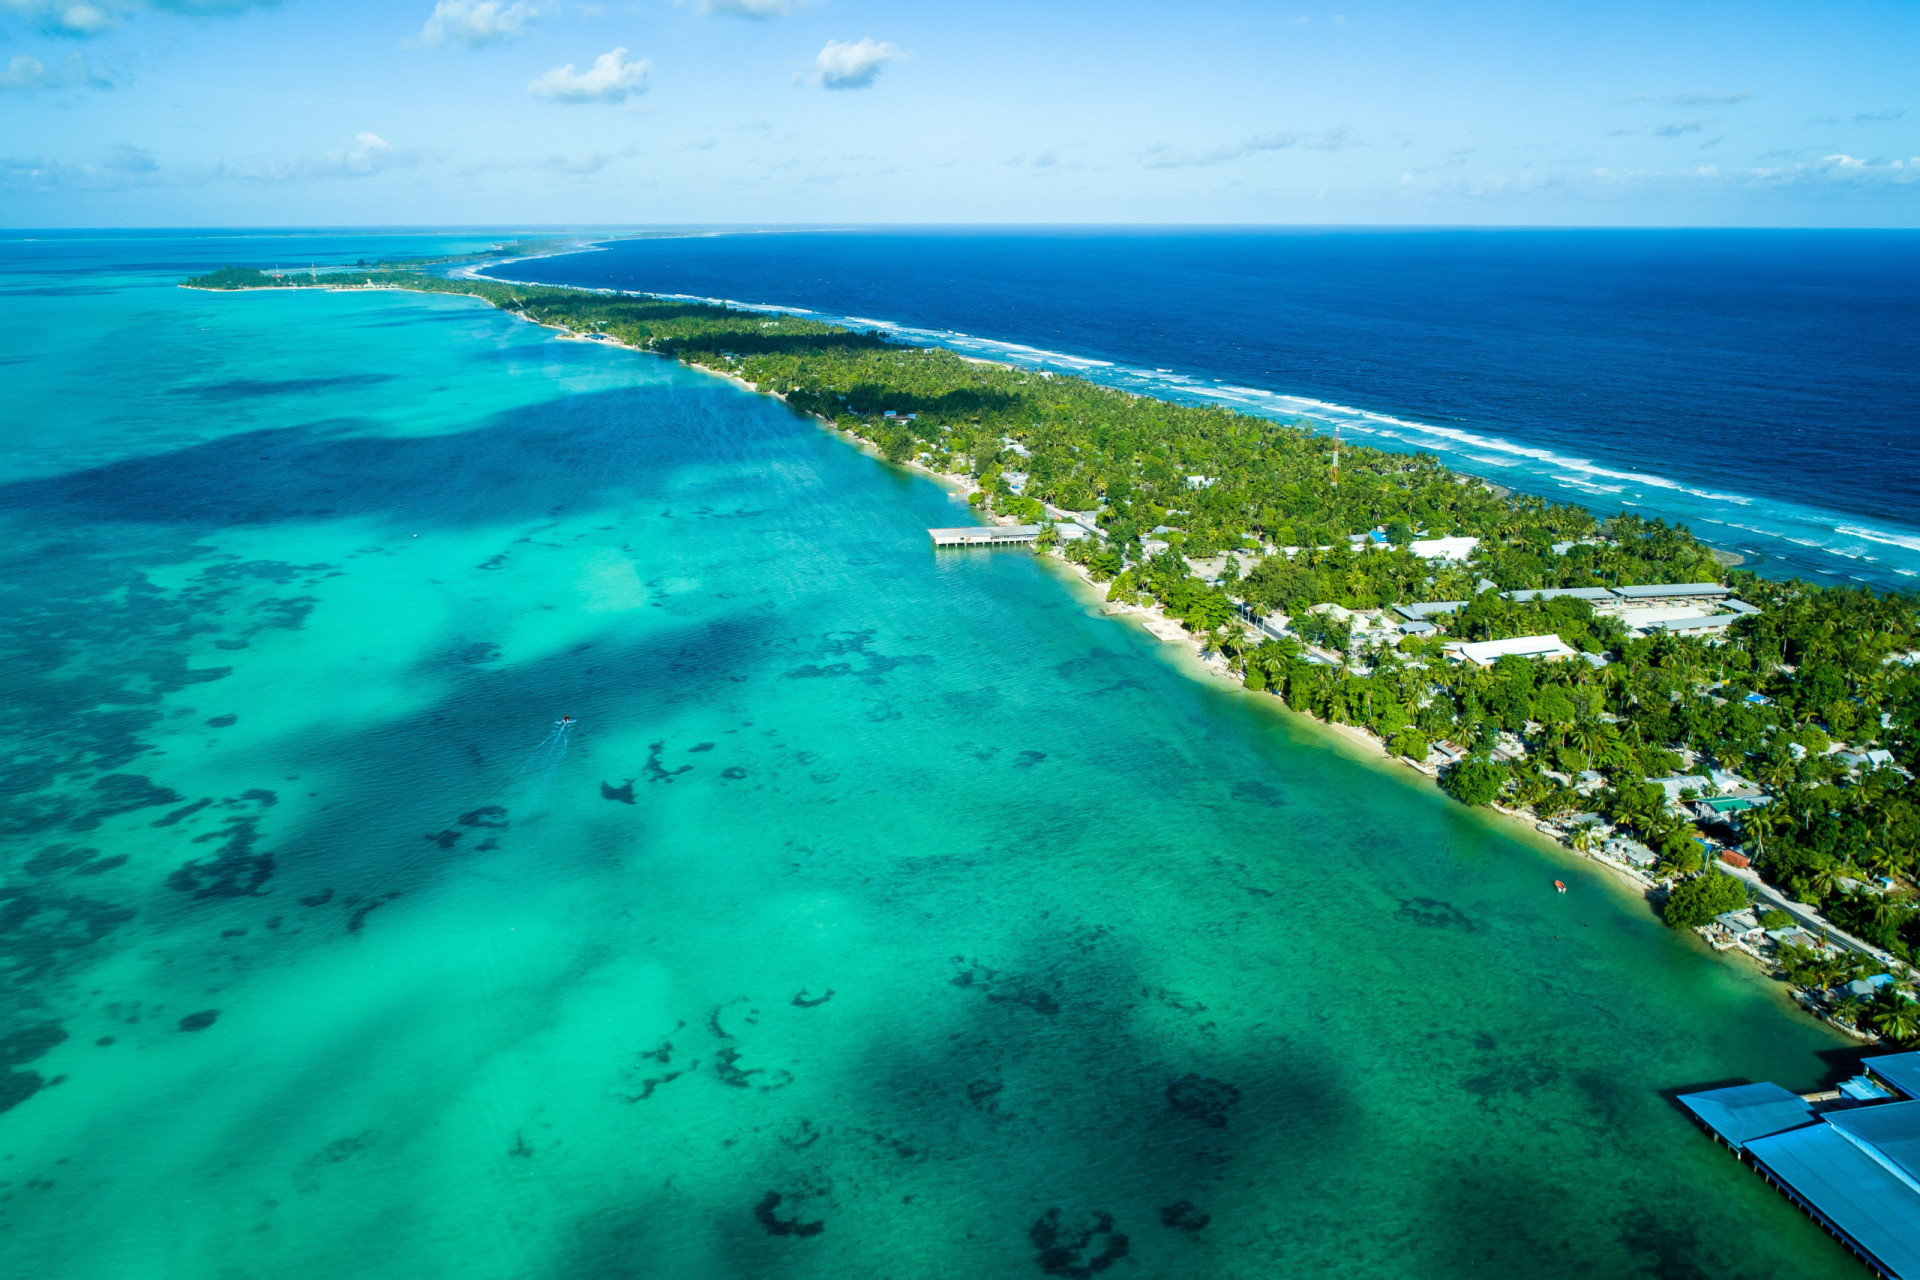 <p>Kiribati’s tourism sector is steadily growing, thanks largely to its pristine beaches, world-class diving spots, and the unique cultural heritage of the islands.</p><p><a href="https://www.msn.com/en-us/community/channel/vid-7xx8mnucu55yw63we9va2gwr7uihbxwc68fxqp25x6tg4ftibpra?cvid=94631541bc0f4f89bfd59158d696ad7e">Follow us and access great exclusive content every day</a></p>